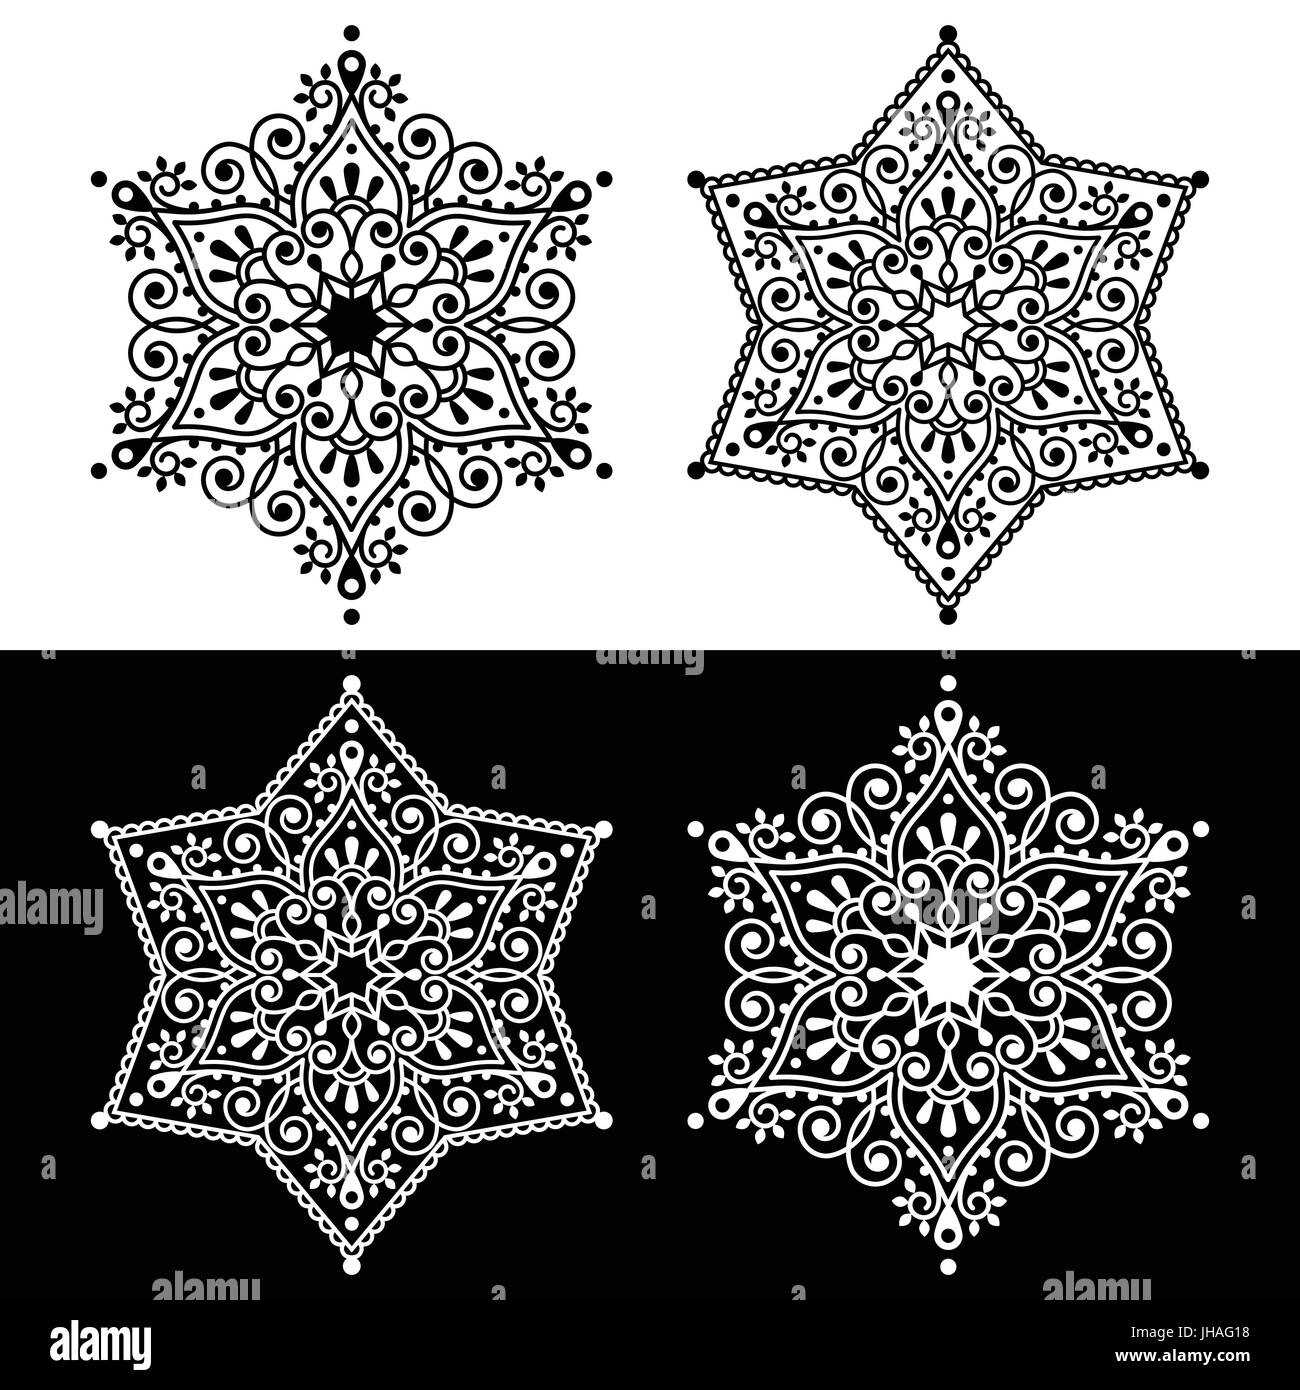 Christmas snowflake design with - embroidery, lace style    Retro snowflake deceoration with swirls in black and white isolated Stock Vector